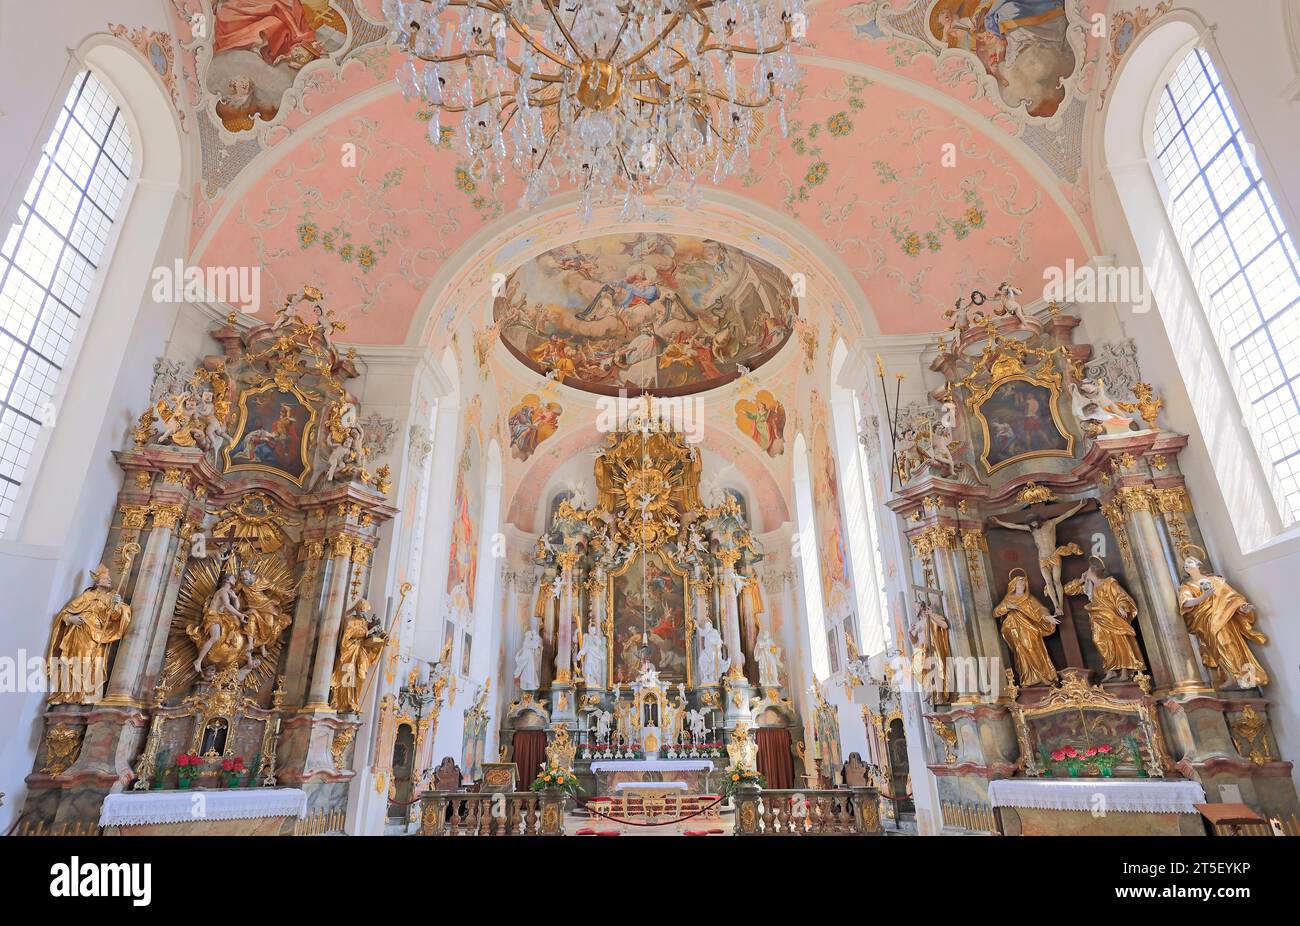 St Peter St Paul Church. Joseph Schmuzer led the construction of the church. The ceiling and wall frescoes were made by Matthew Guenthe. Stock Photo